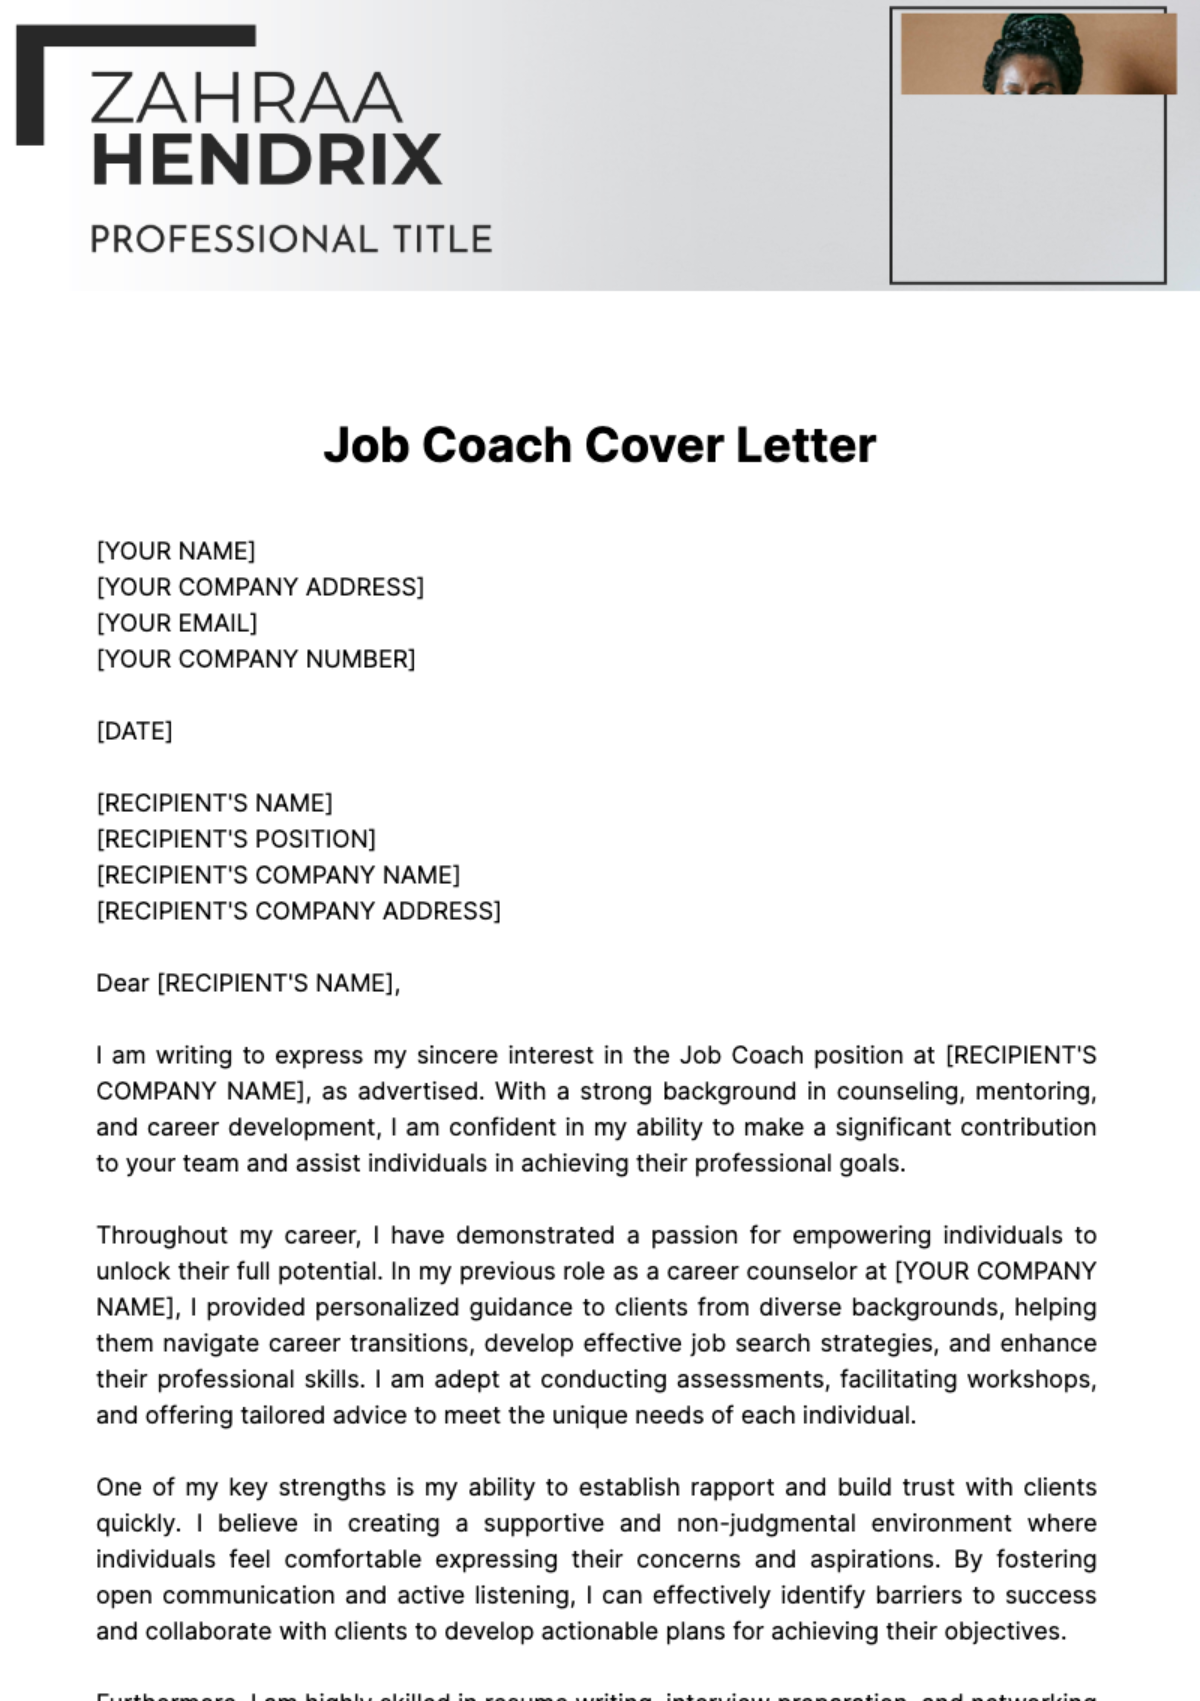 Job Coach Cover Letter Template